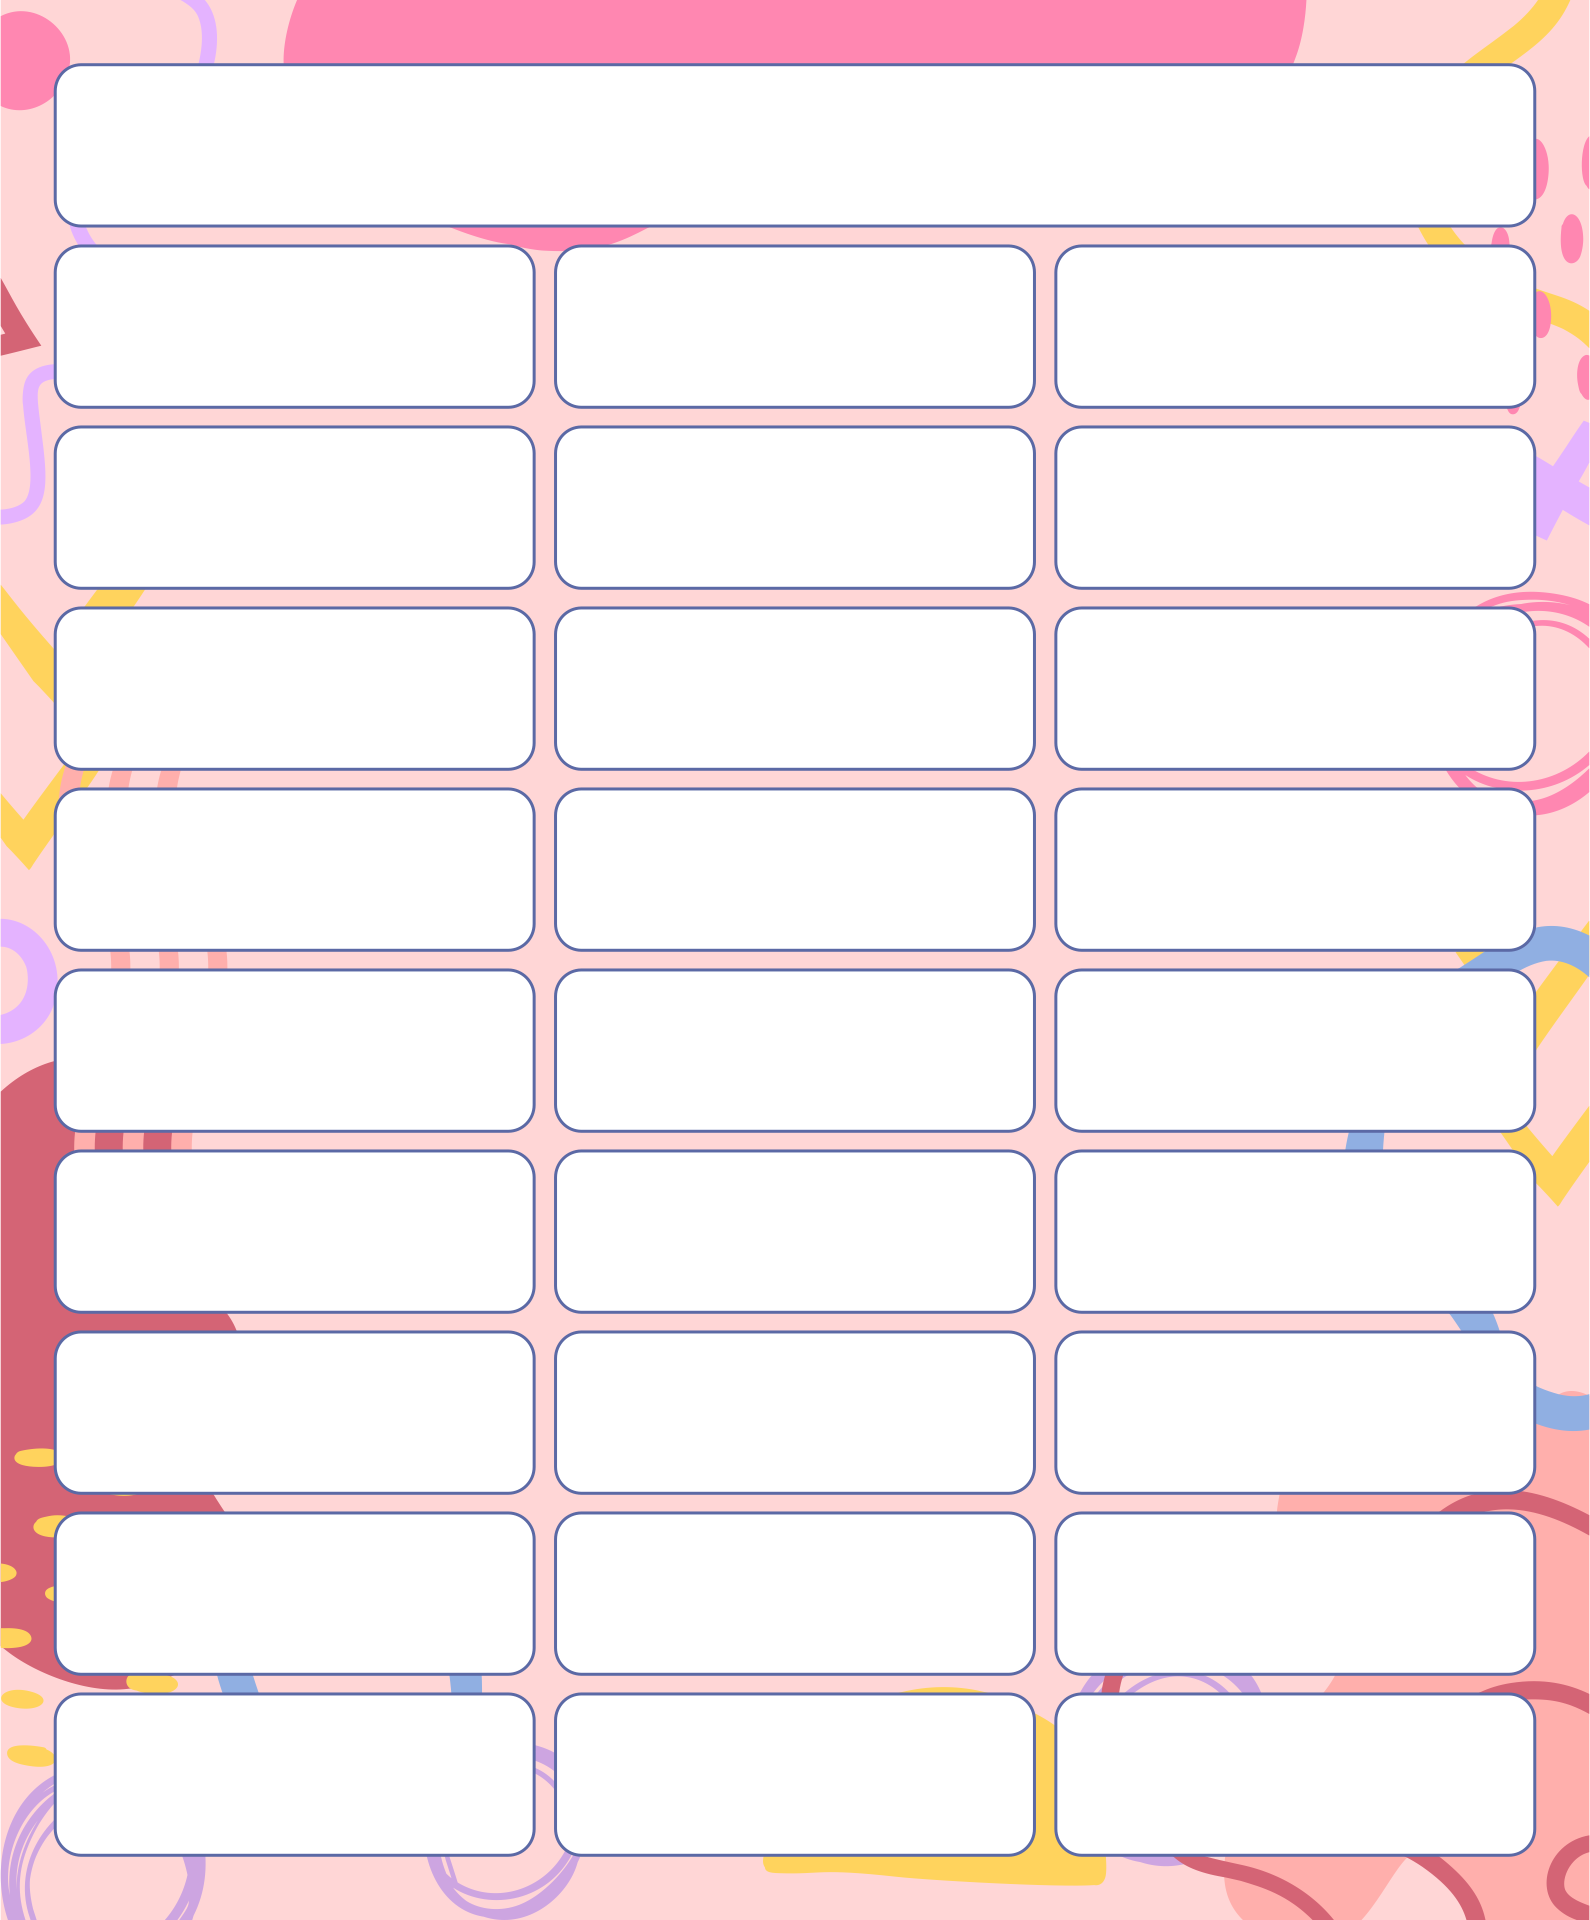 5 Best Images of Printable Blank Chart With Lines Printable Blank